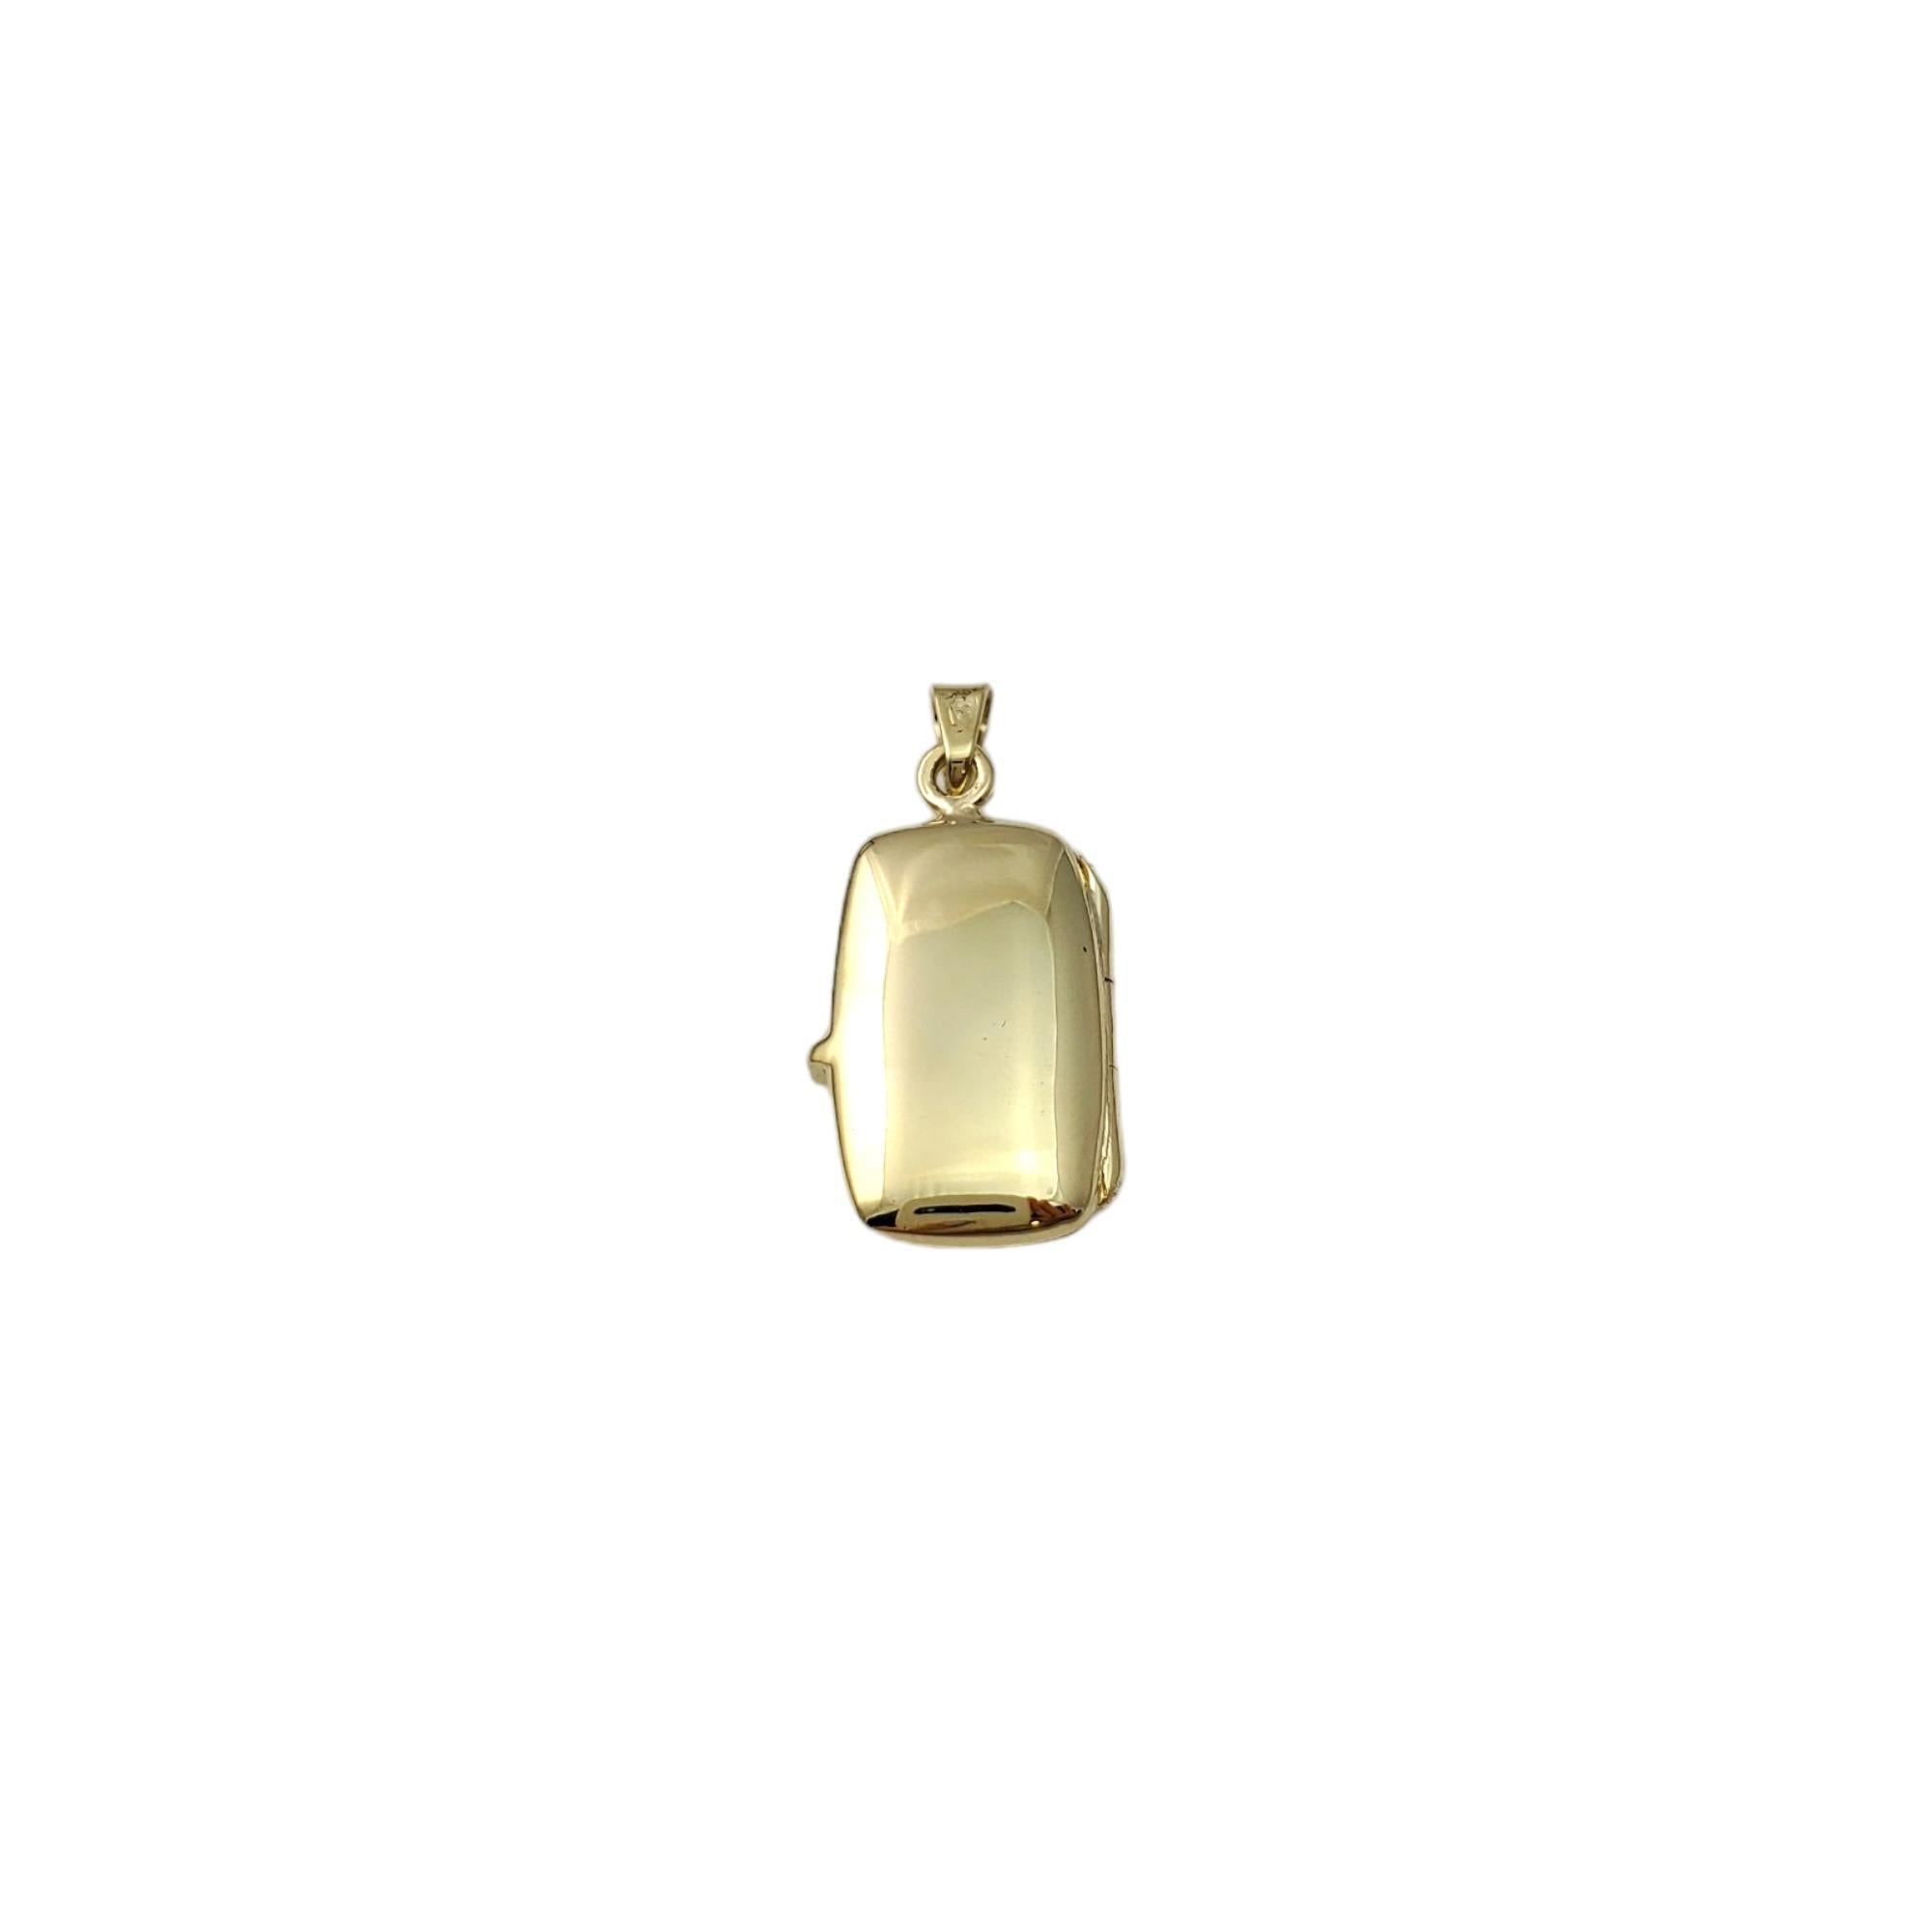 Vintage 14K Yellow Floral Gold Locket Pendant -

This timeless locket pendant is a perfect addition to your jewelry collection.

Size:  27.7 mm X 14.1 mm X 5.0mm

Weight:  2.3 dwt. /  3.6 gr.

Marked: 14K 

Opens and closes securely - no glass or